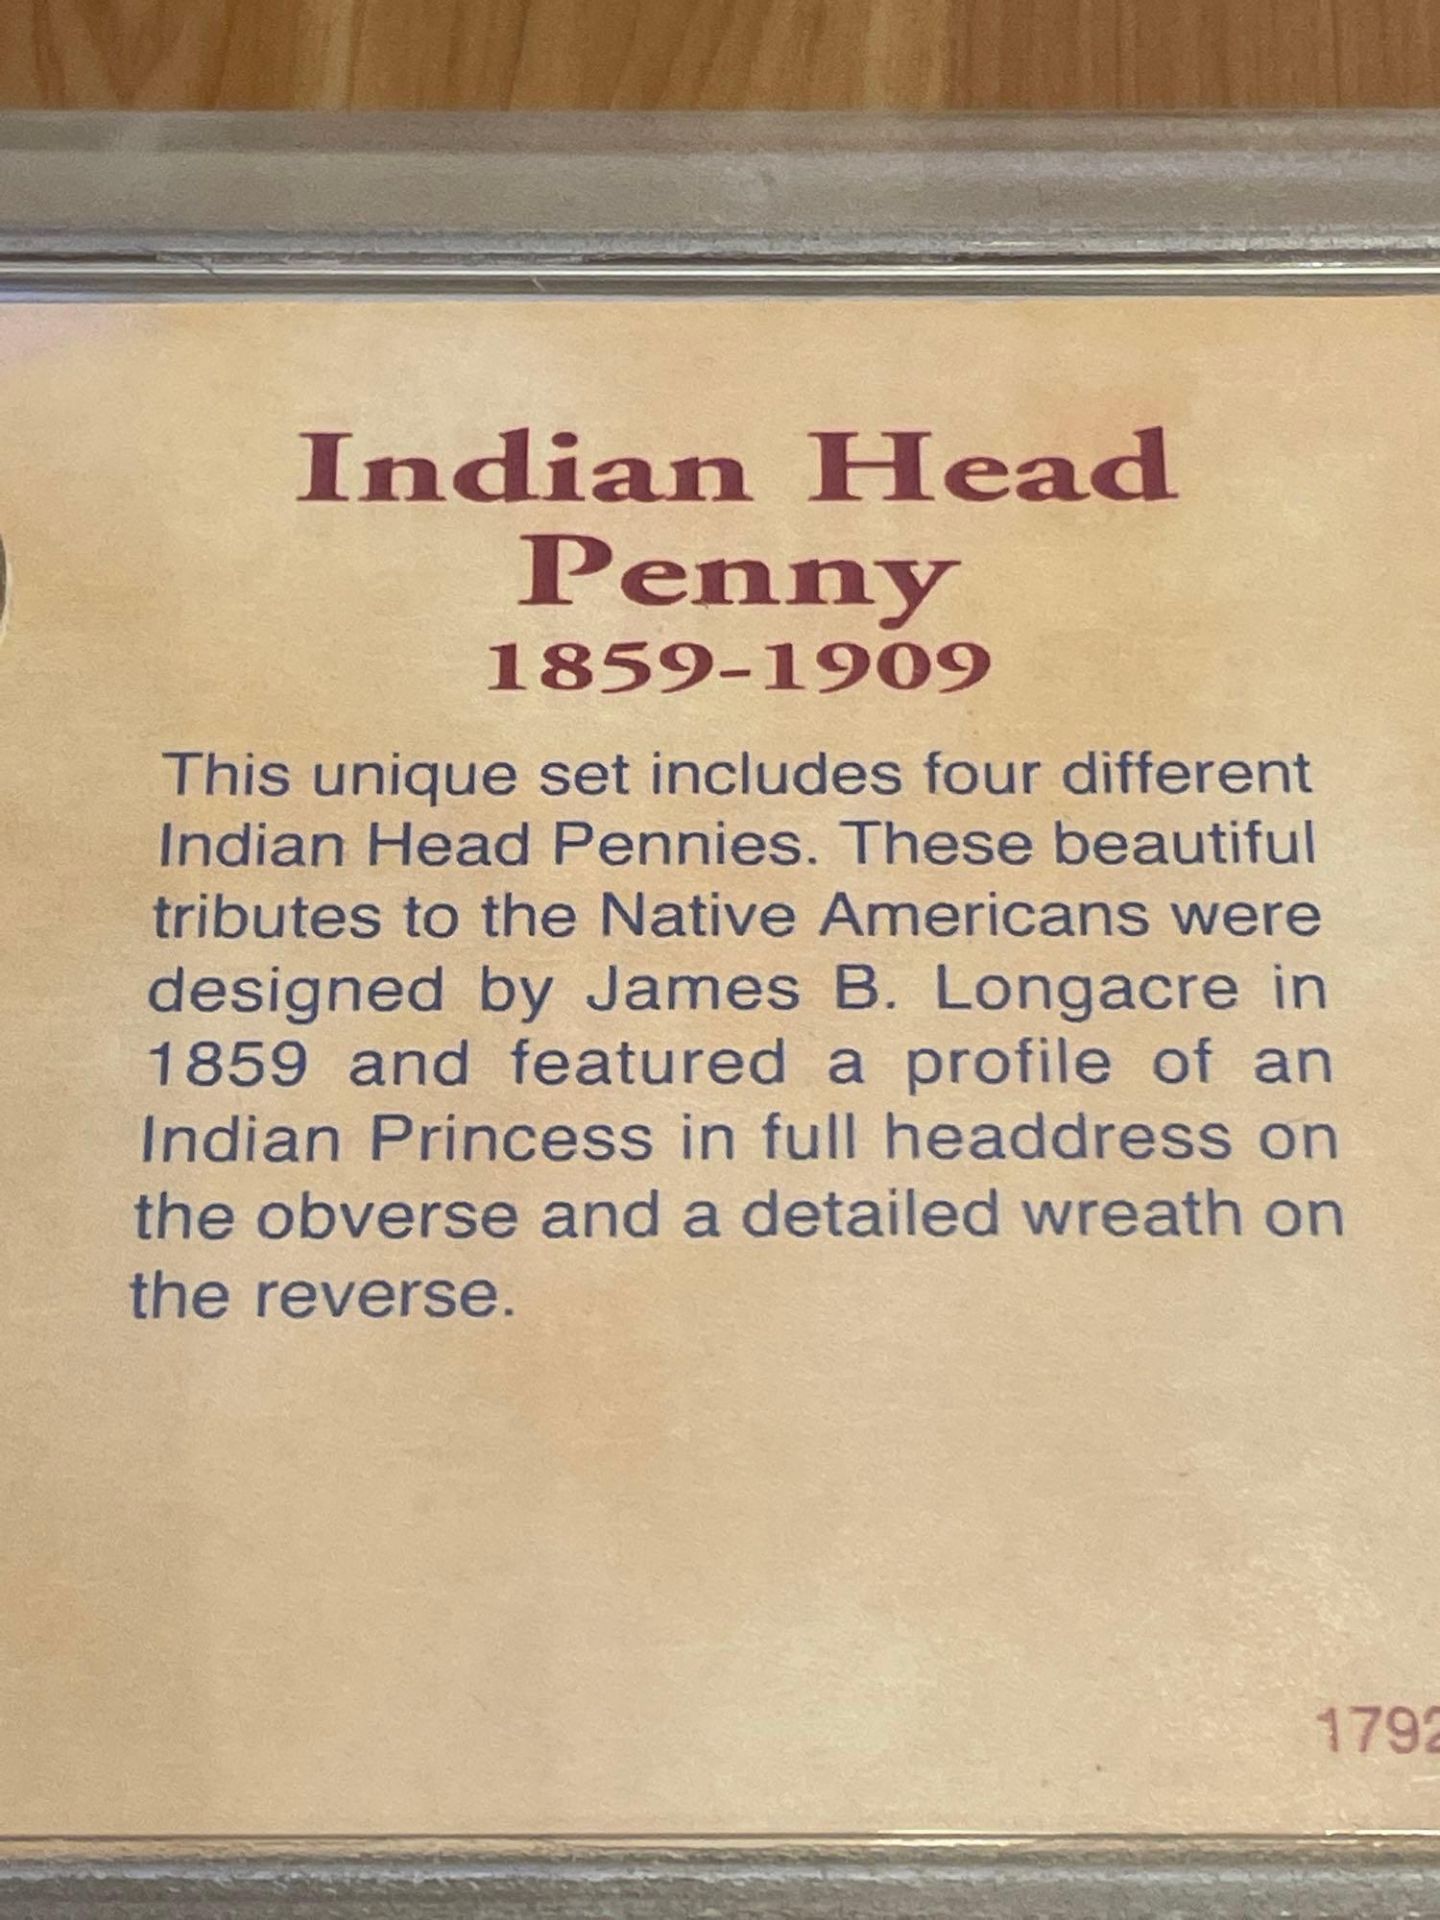 Coins of The American Frontier: Indian Head Penny Collection 1892, 1893, 1898, 1908 - Image 6 of 6